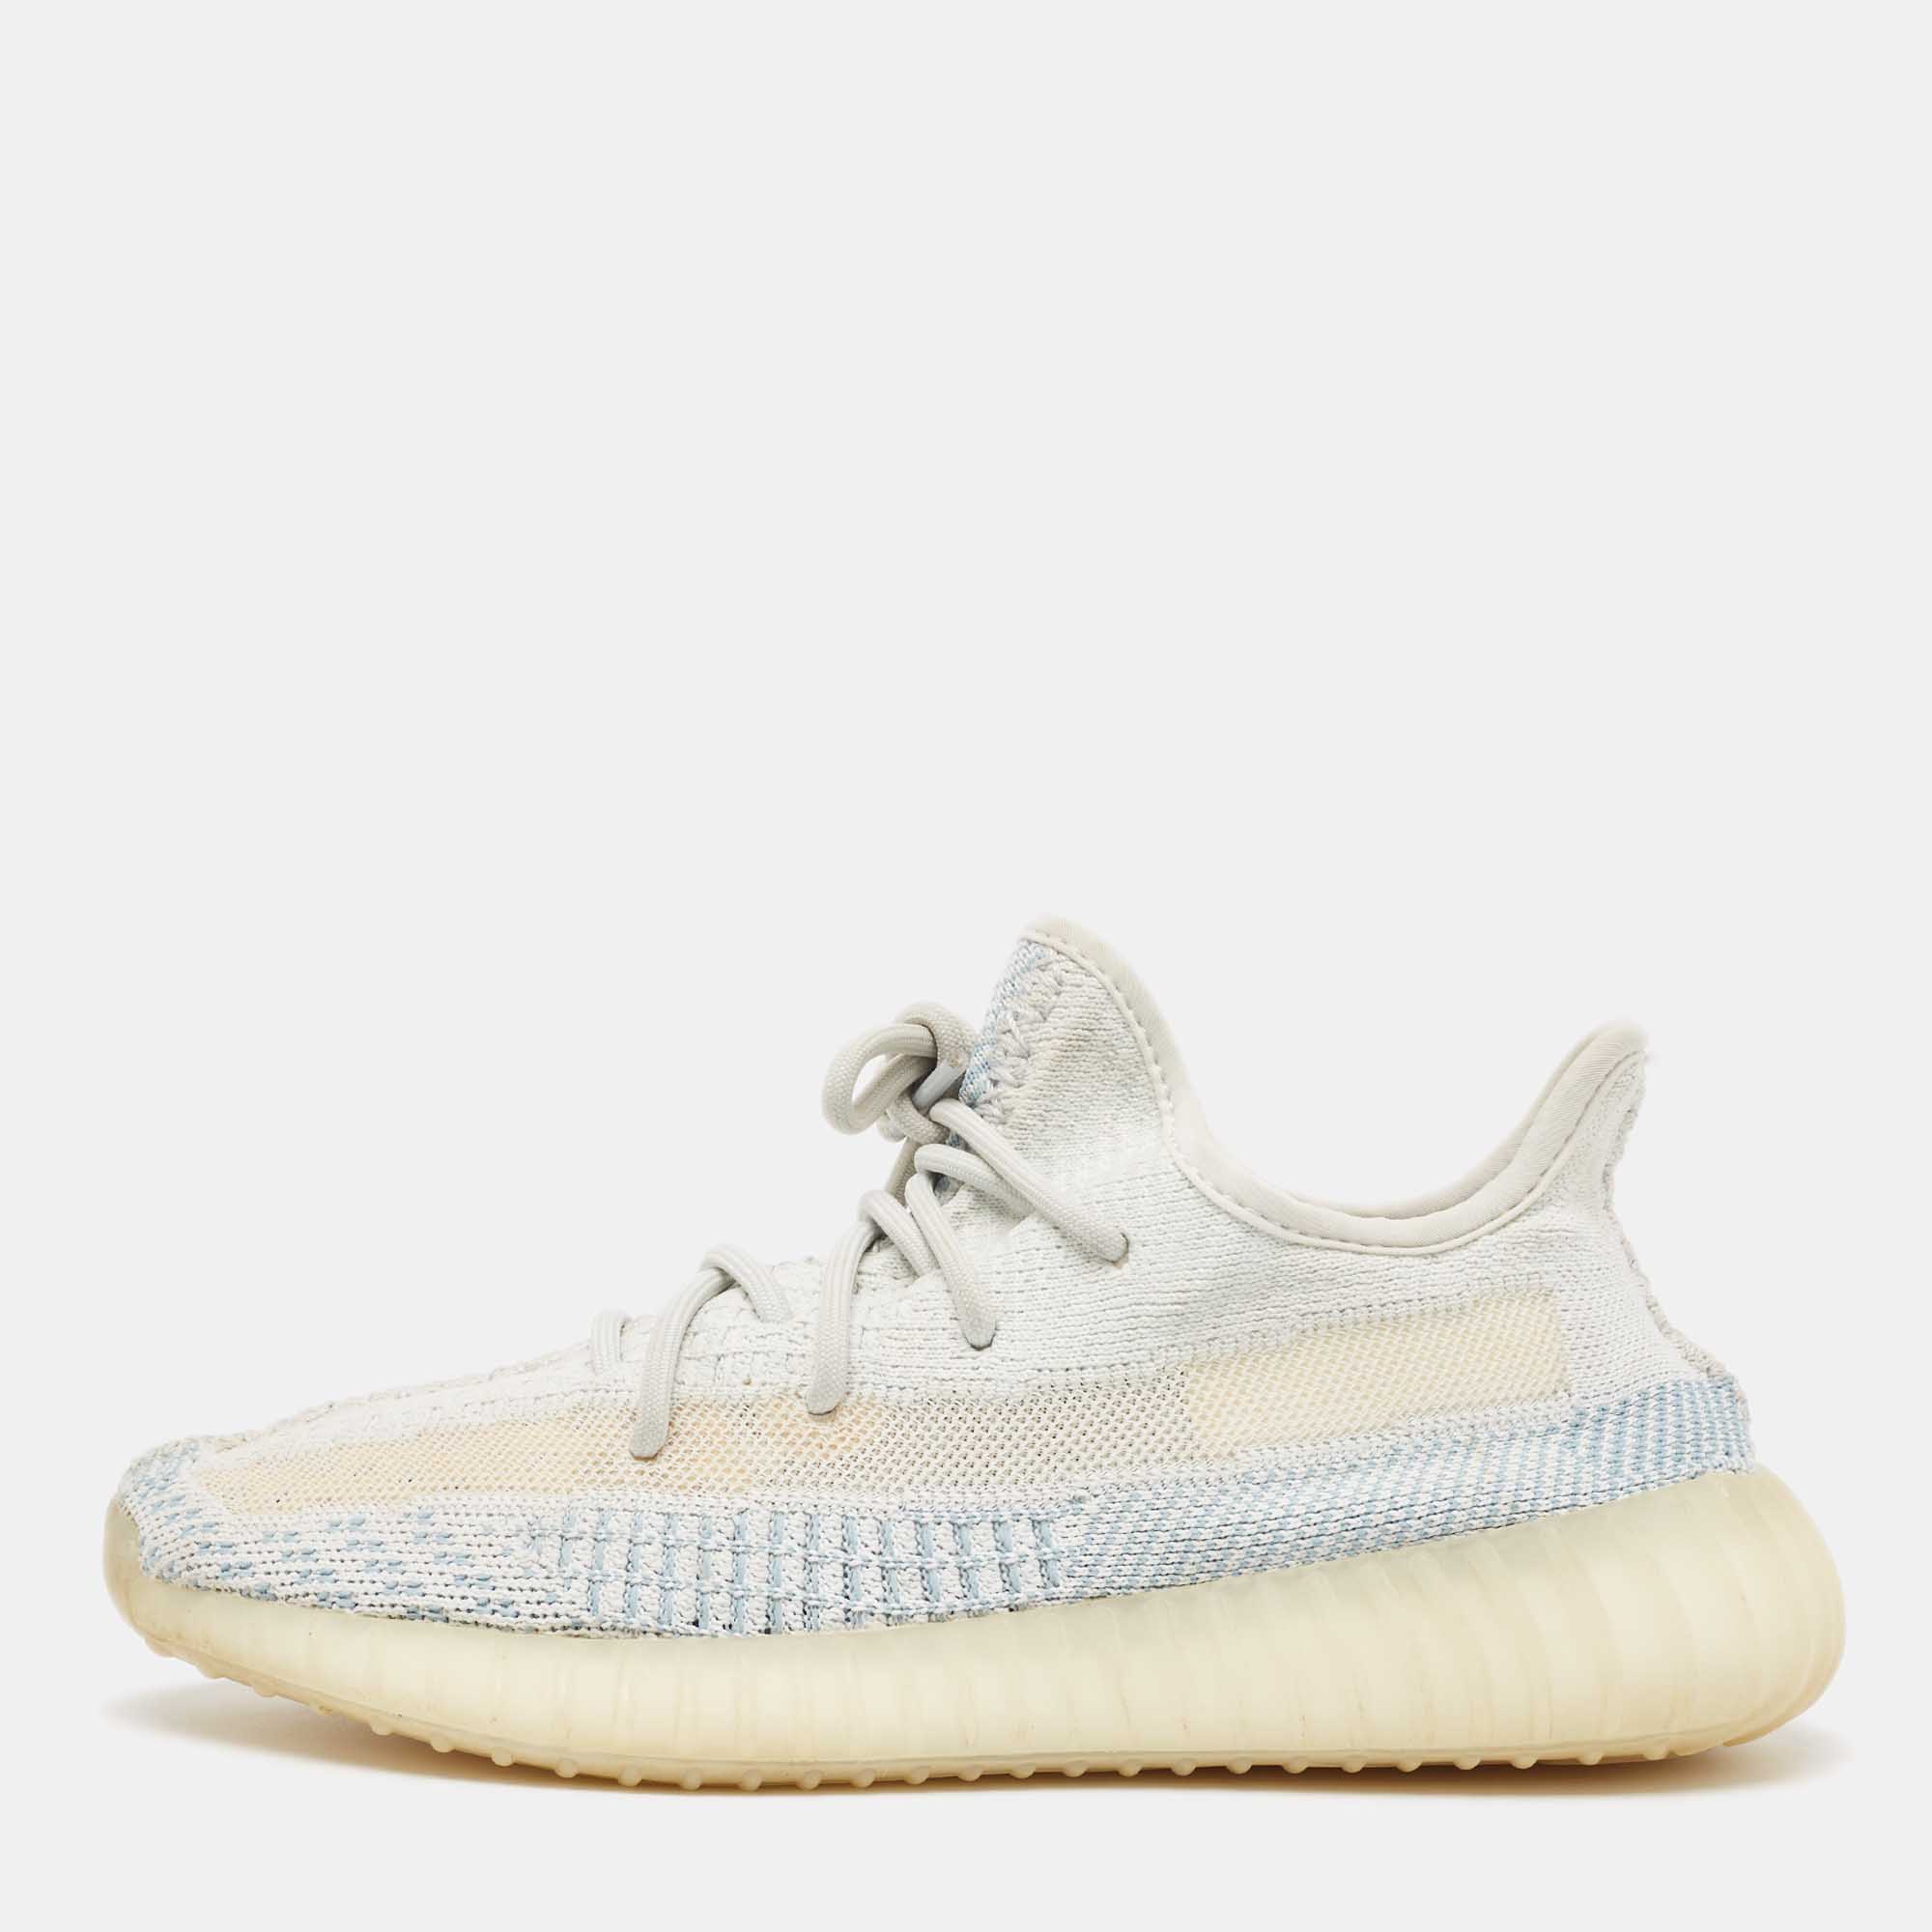 

Yeezy x Adidas Blue/White Knit Fabric Boost 350 V2 Cloud White Non-Reflective Sneakers Size 40